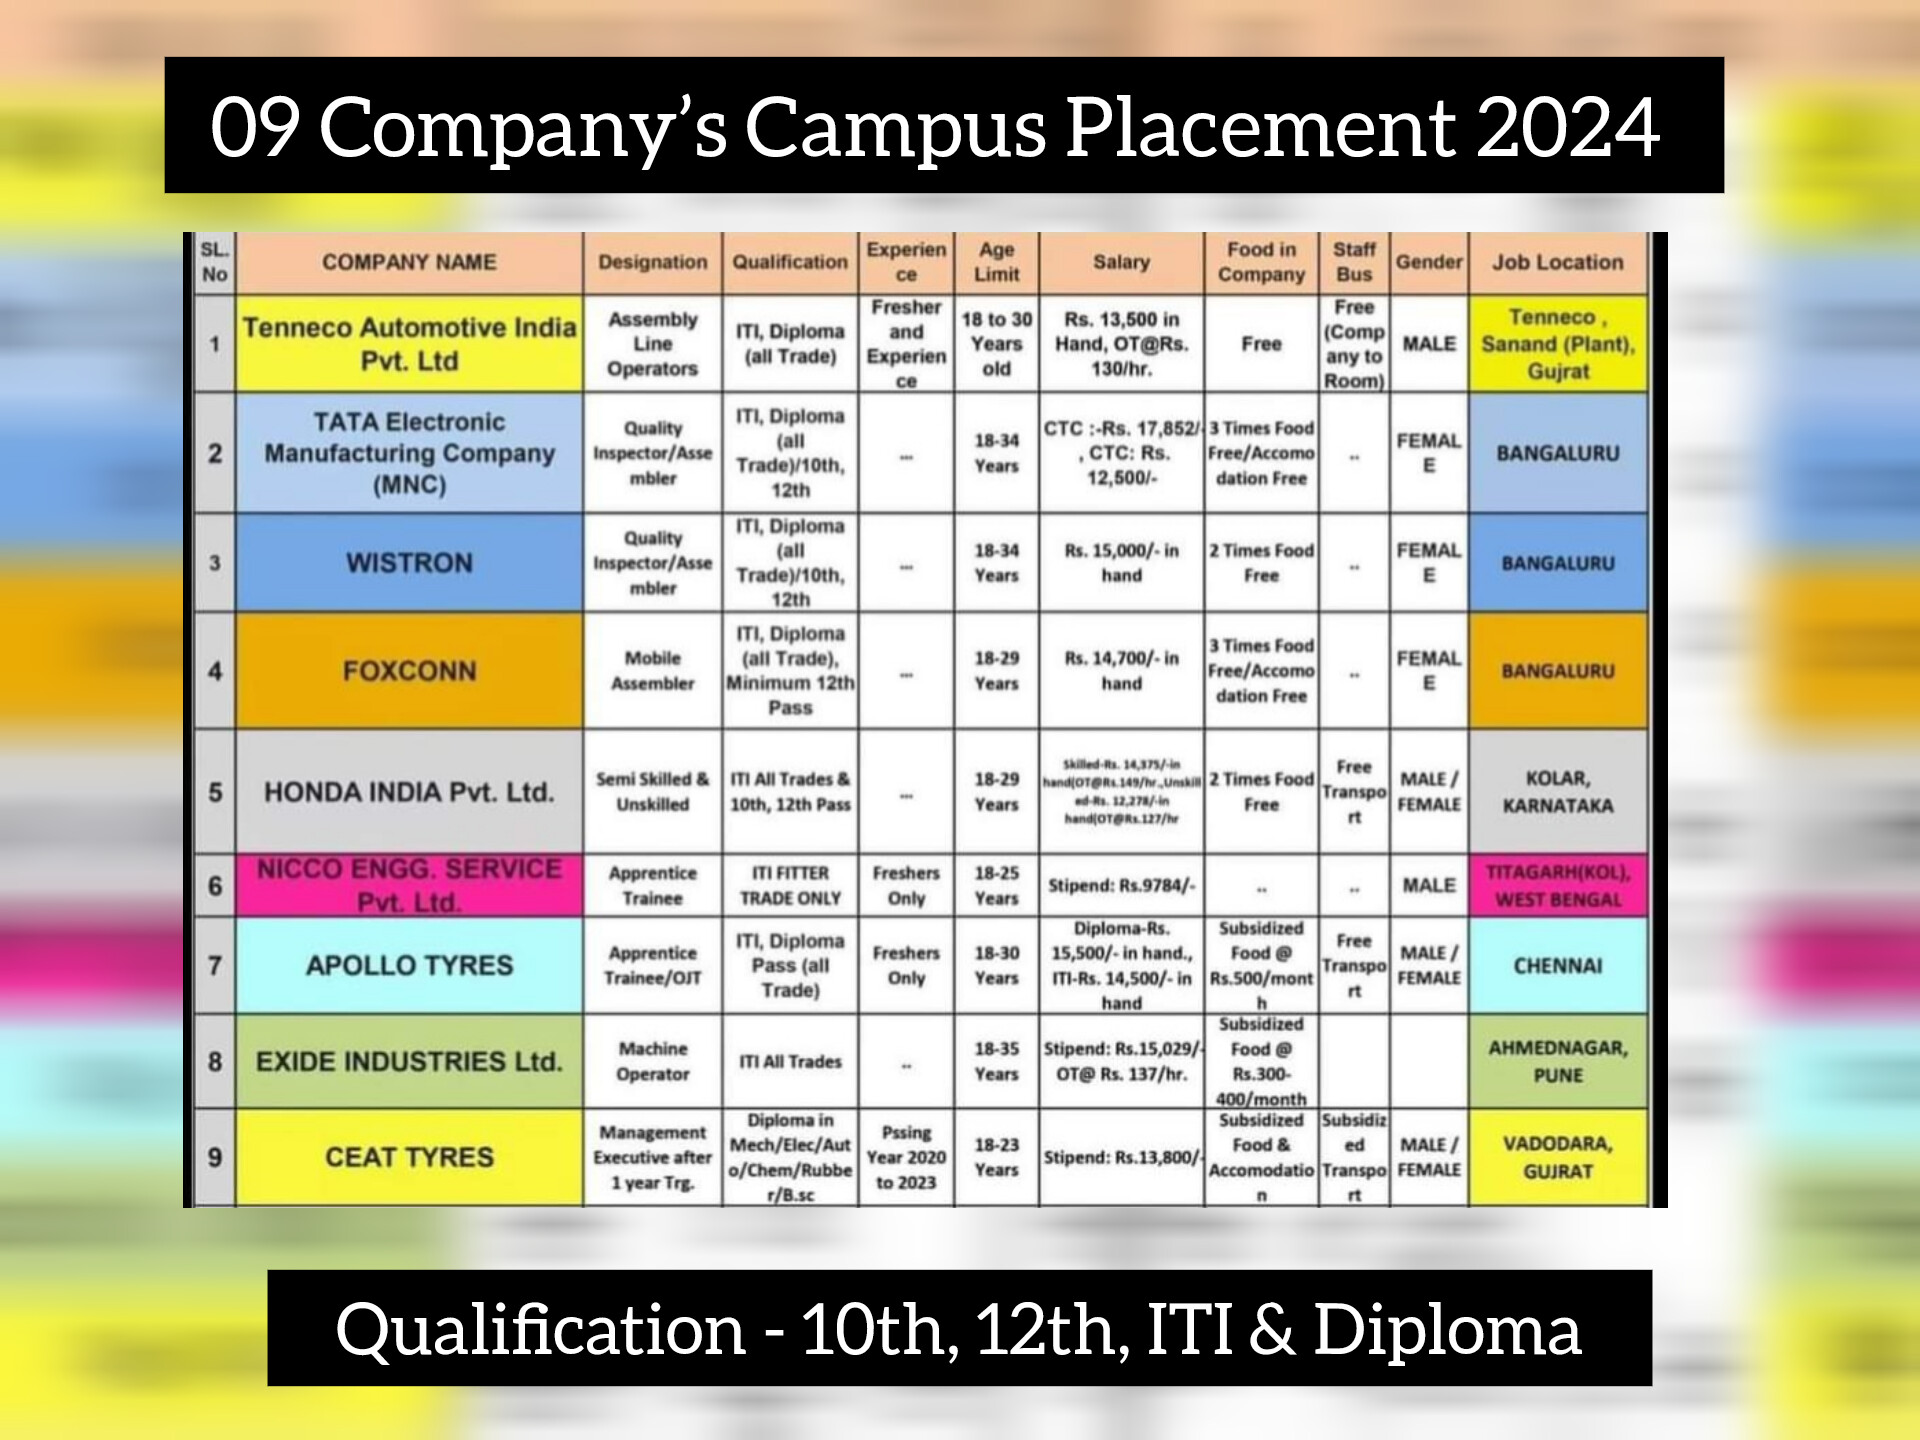 CEAT tyers & 8 Other Company’s Campus Placement 2024